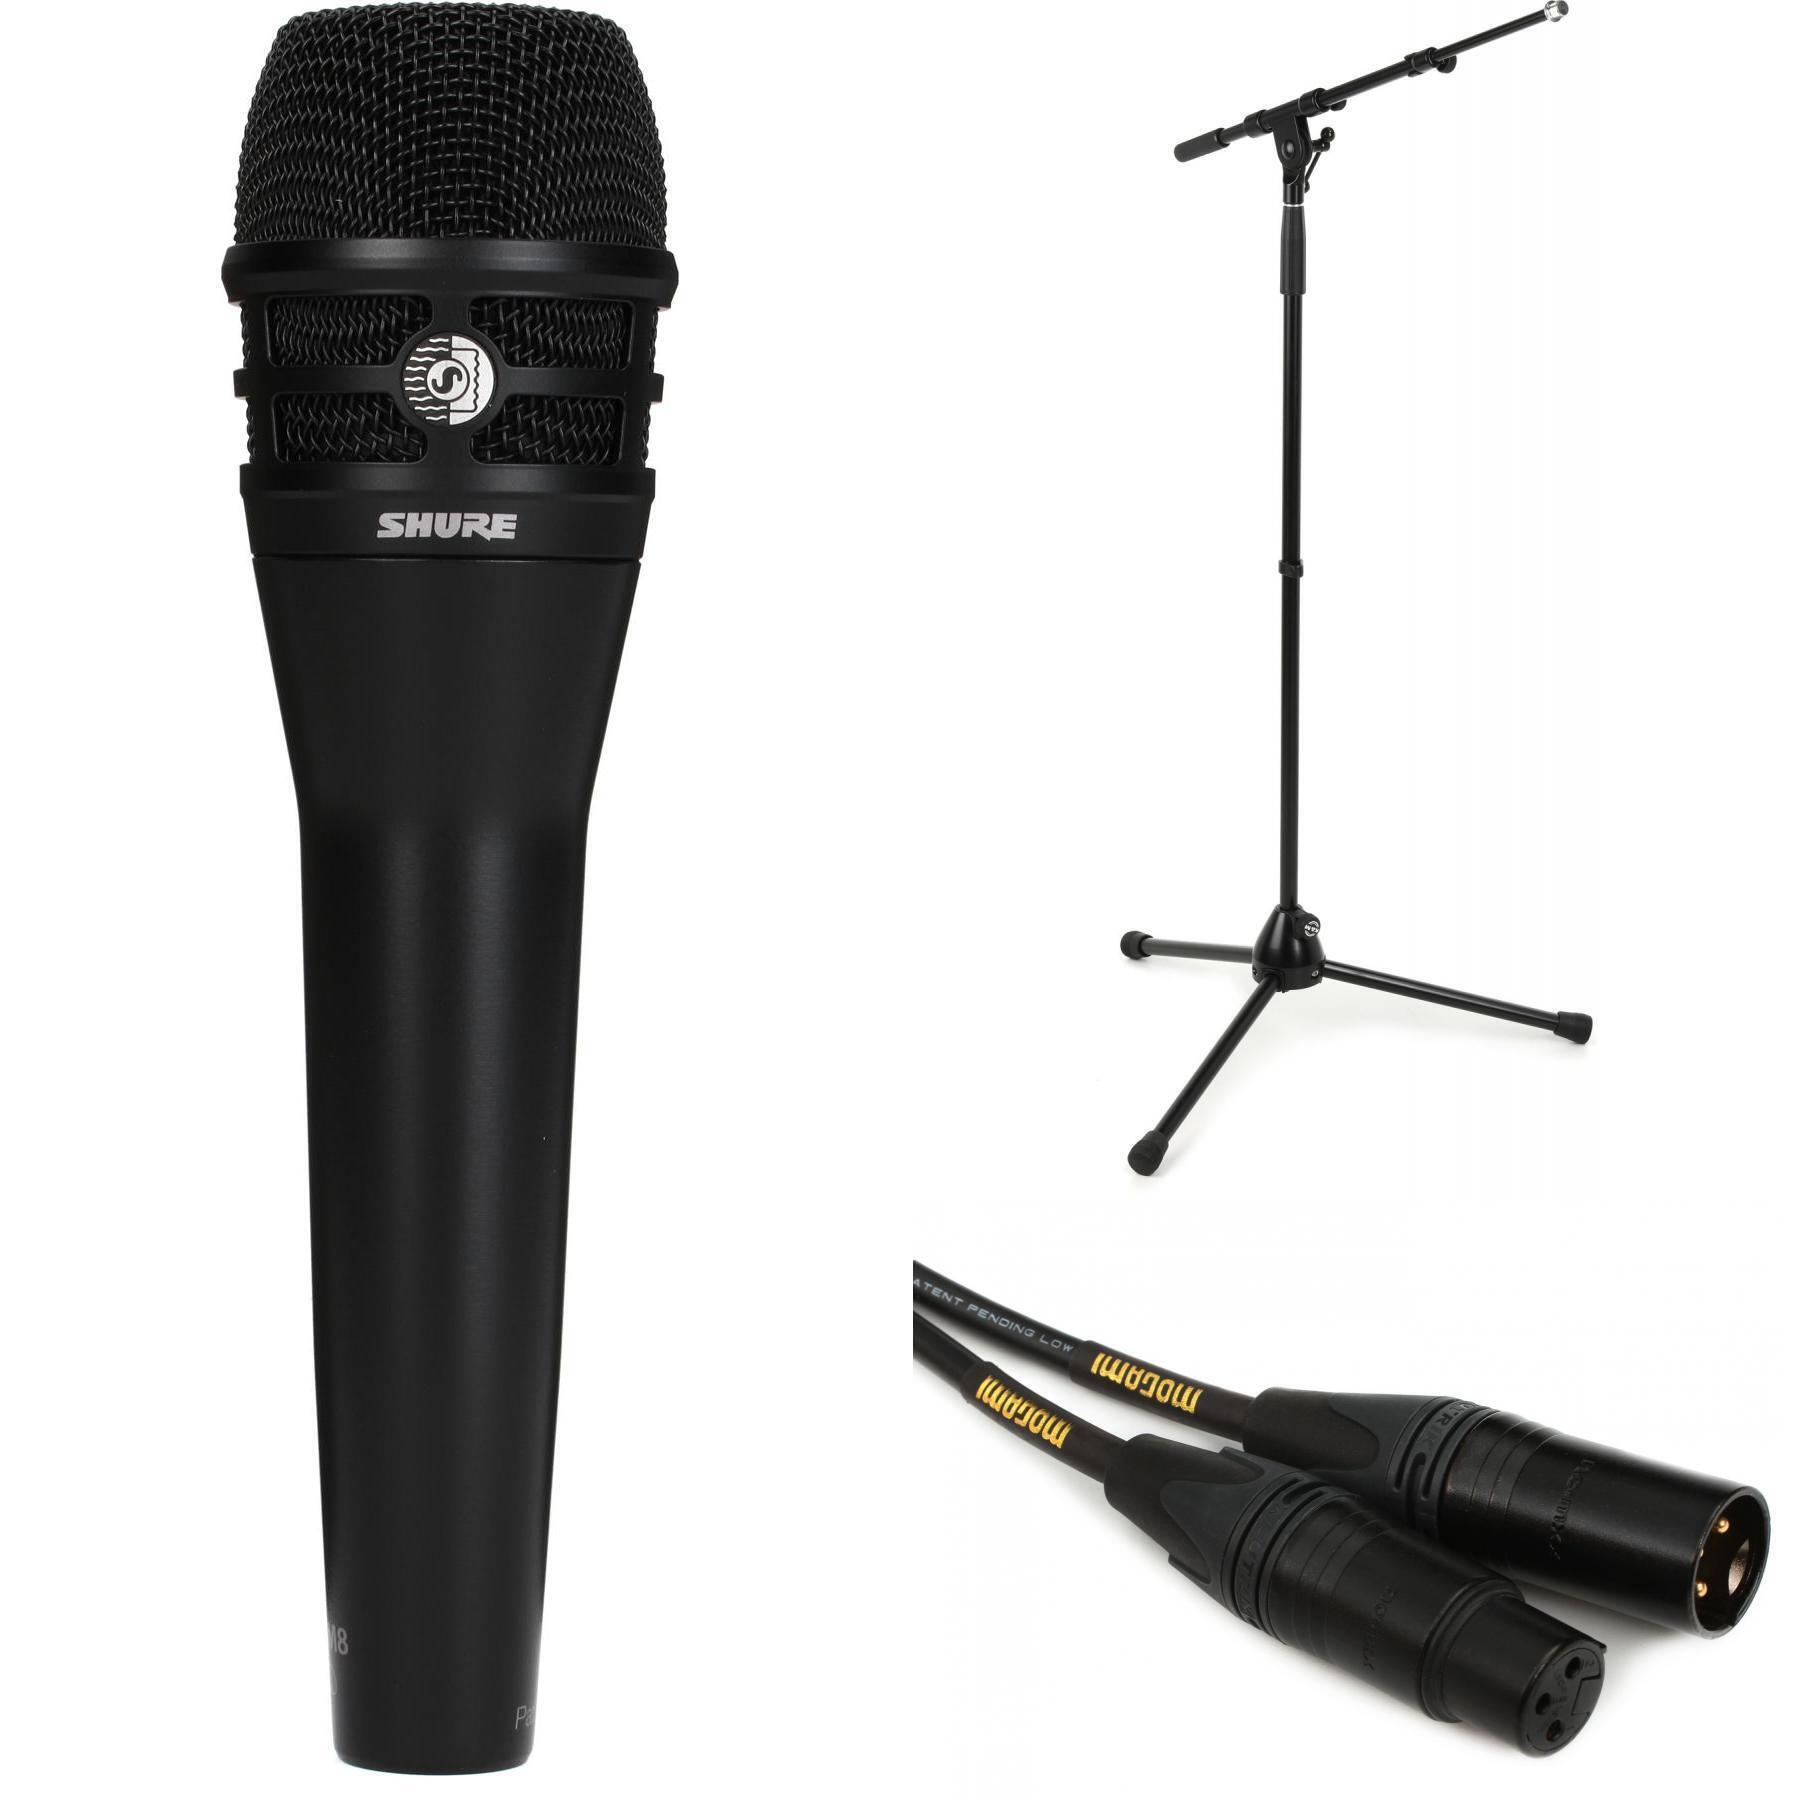 Shure KSM8B Handheld Microphone Bundle with Stand and Cable - Black